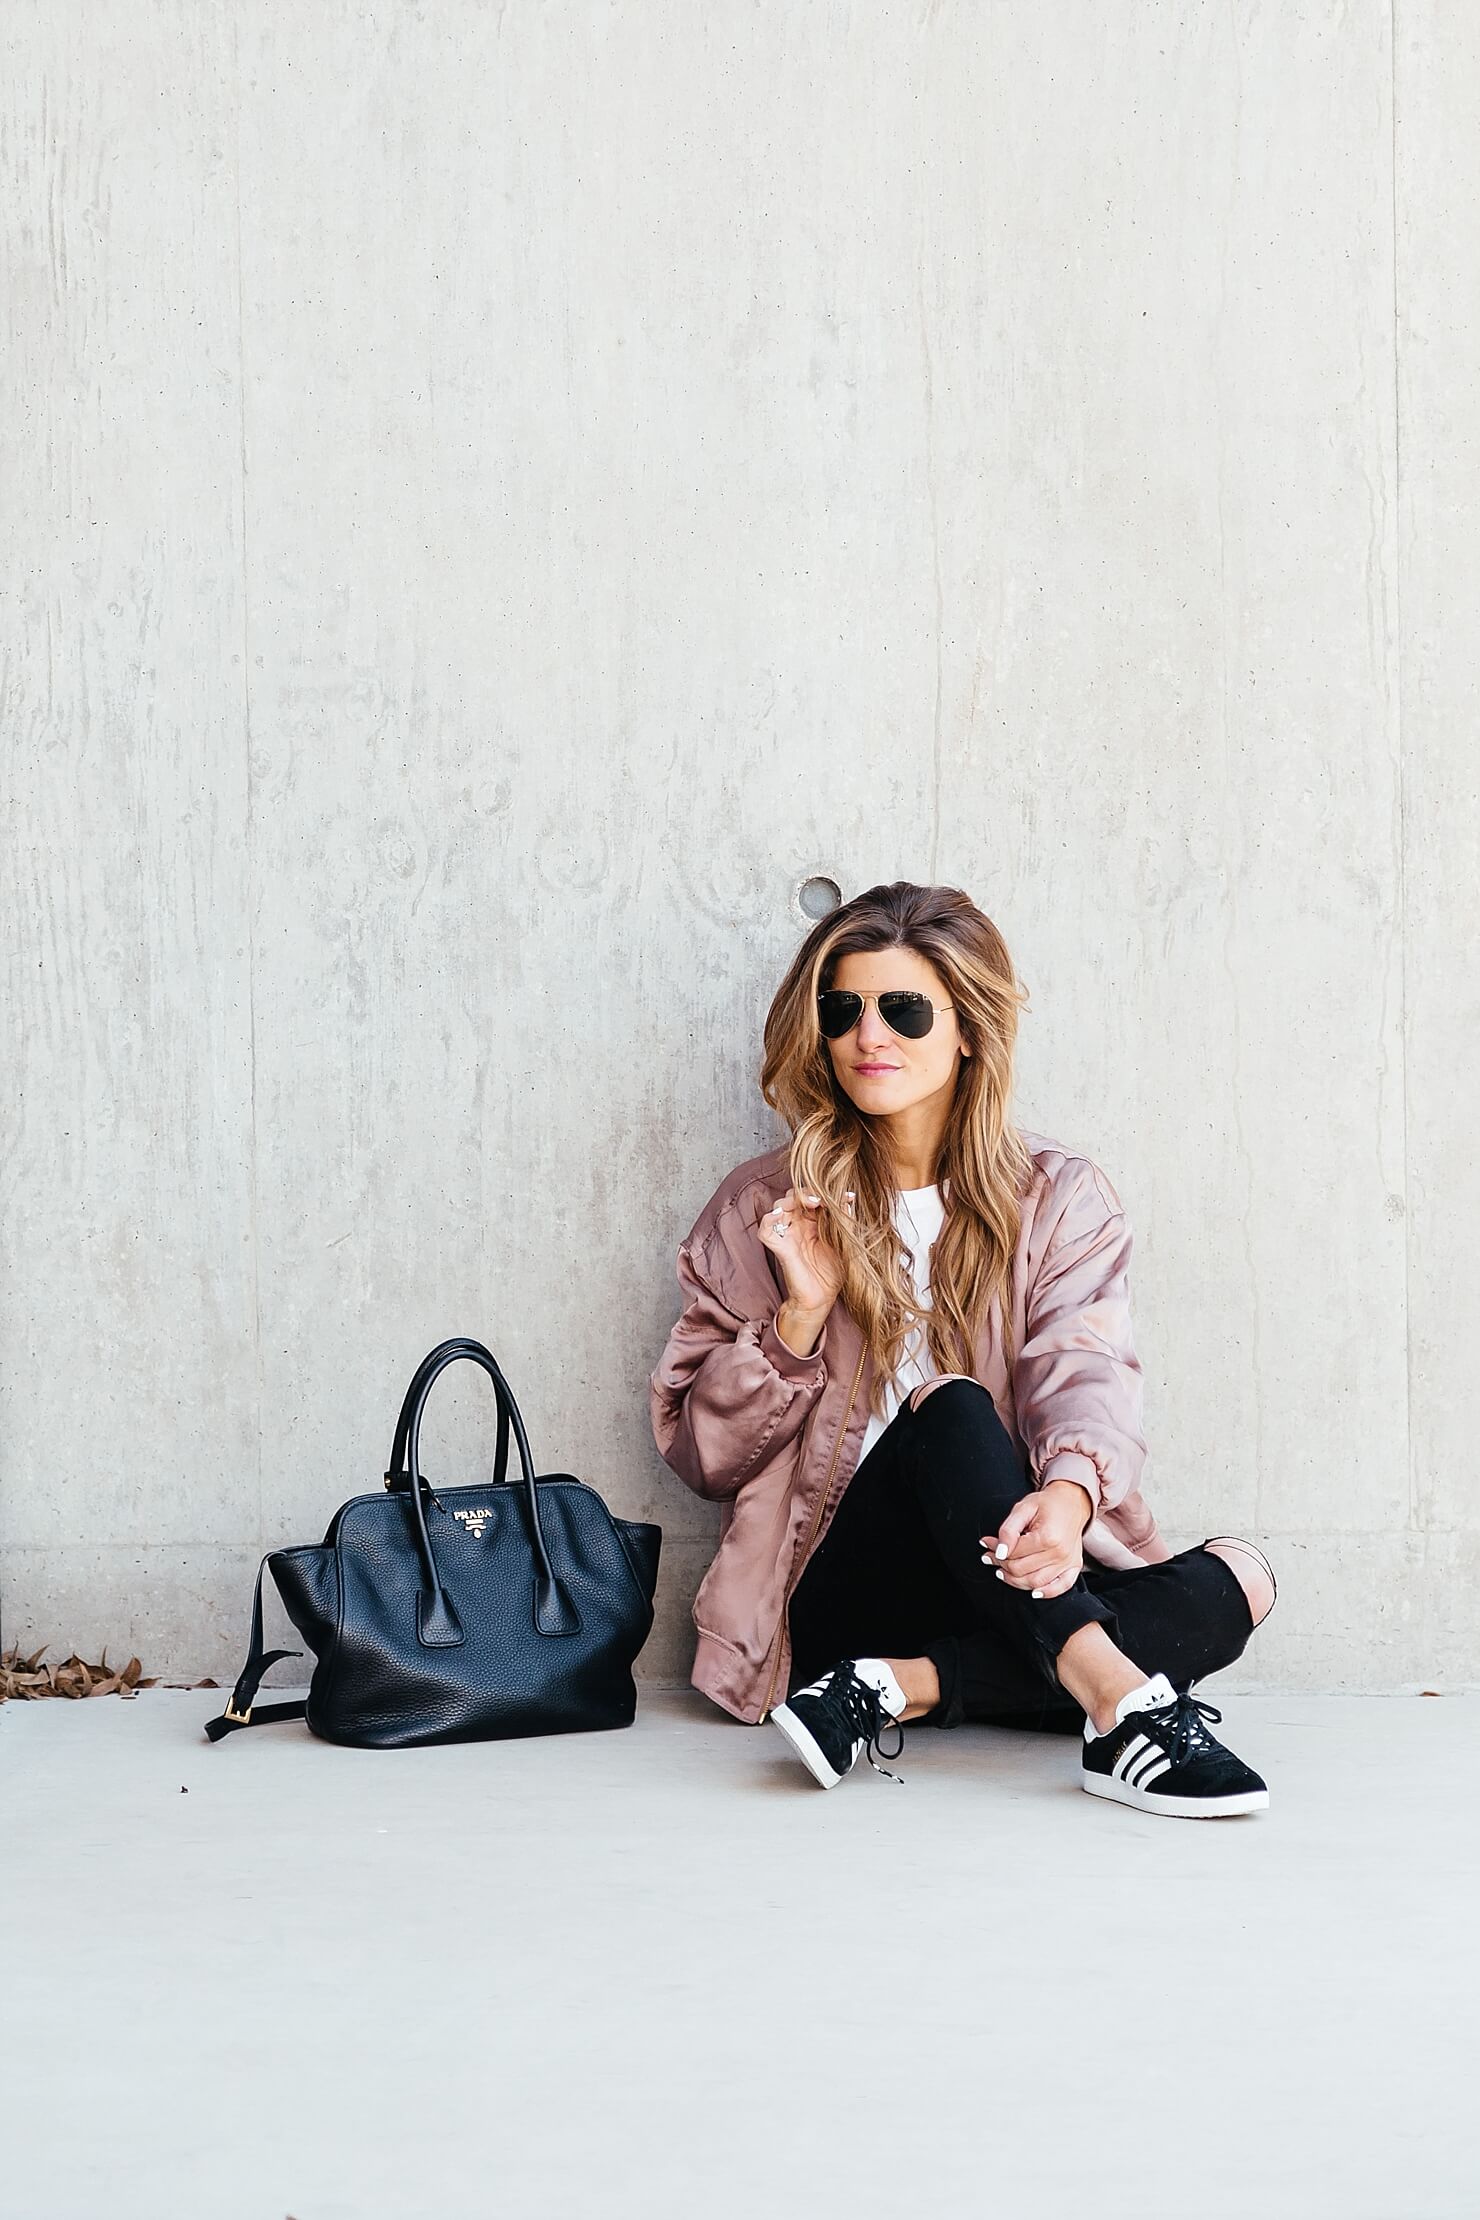 sincerely jules lips and lashes tee, leith pink bomber jacket, black jeans, casual everyday outfit, adidas gazelle sneakers